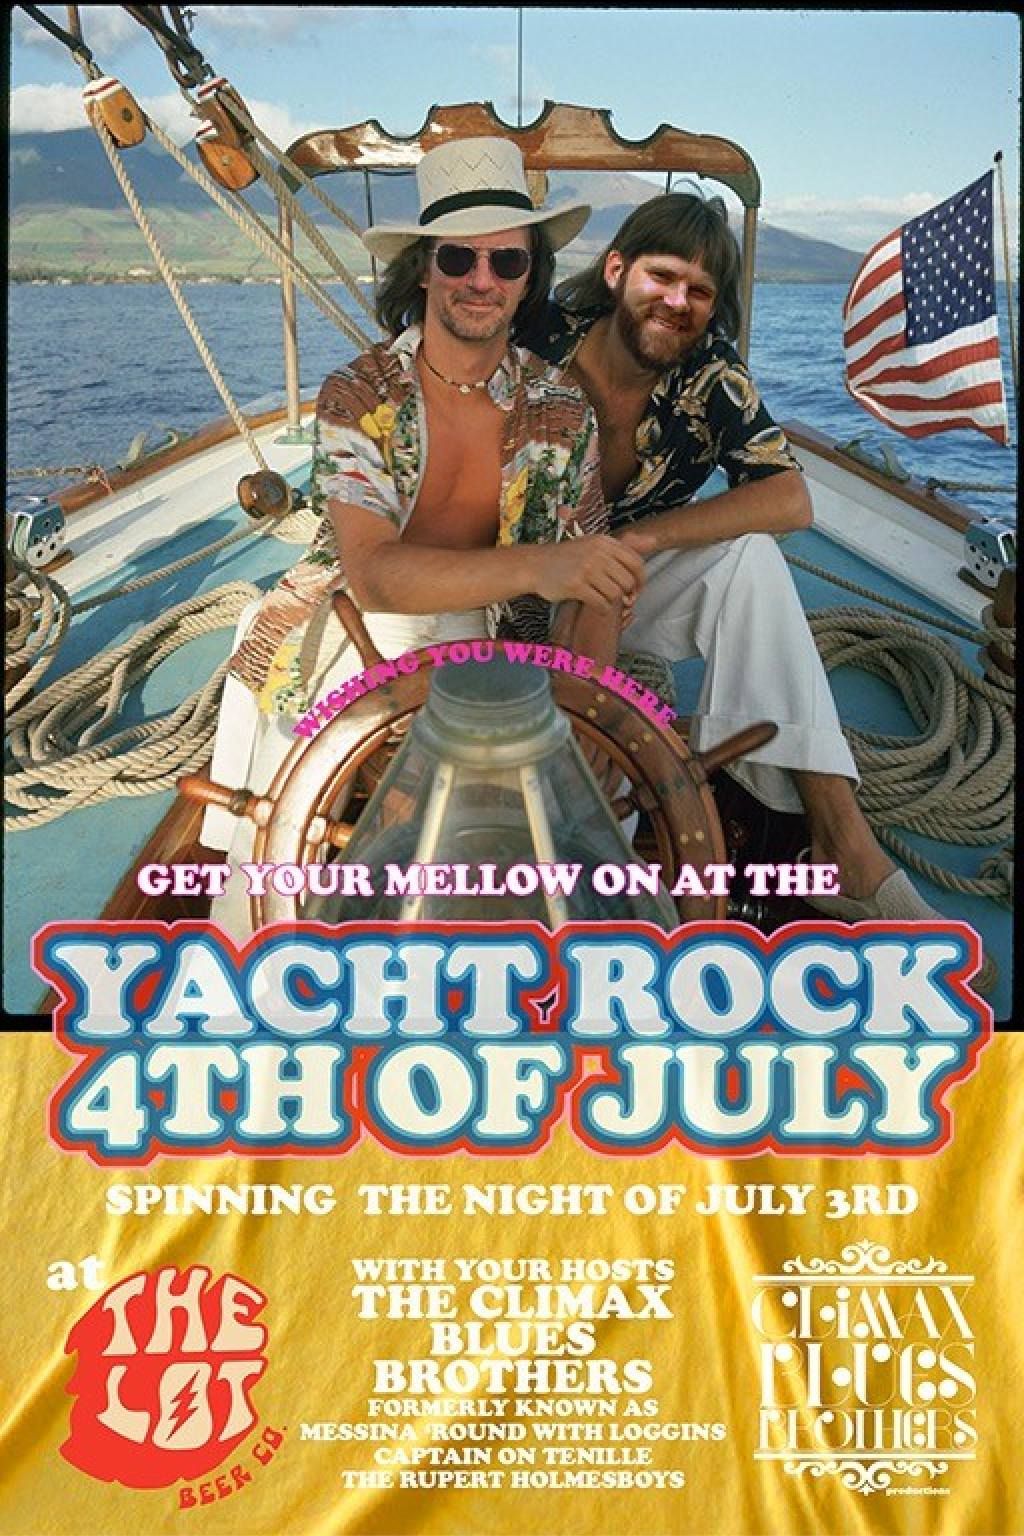 Yacht Rock 4th of July!!